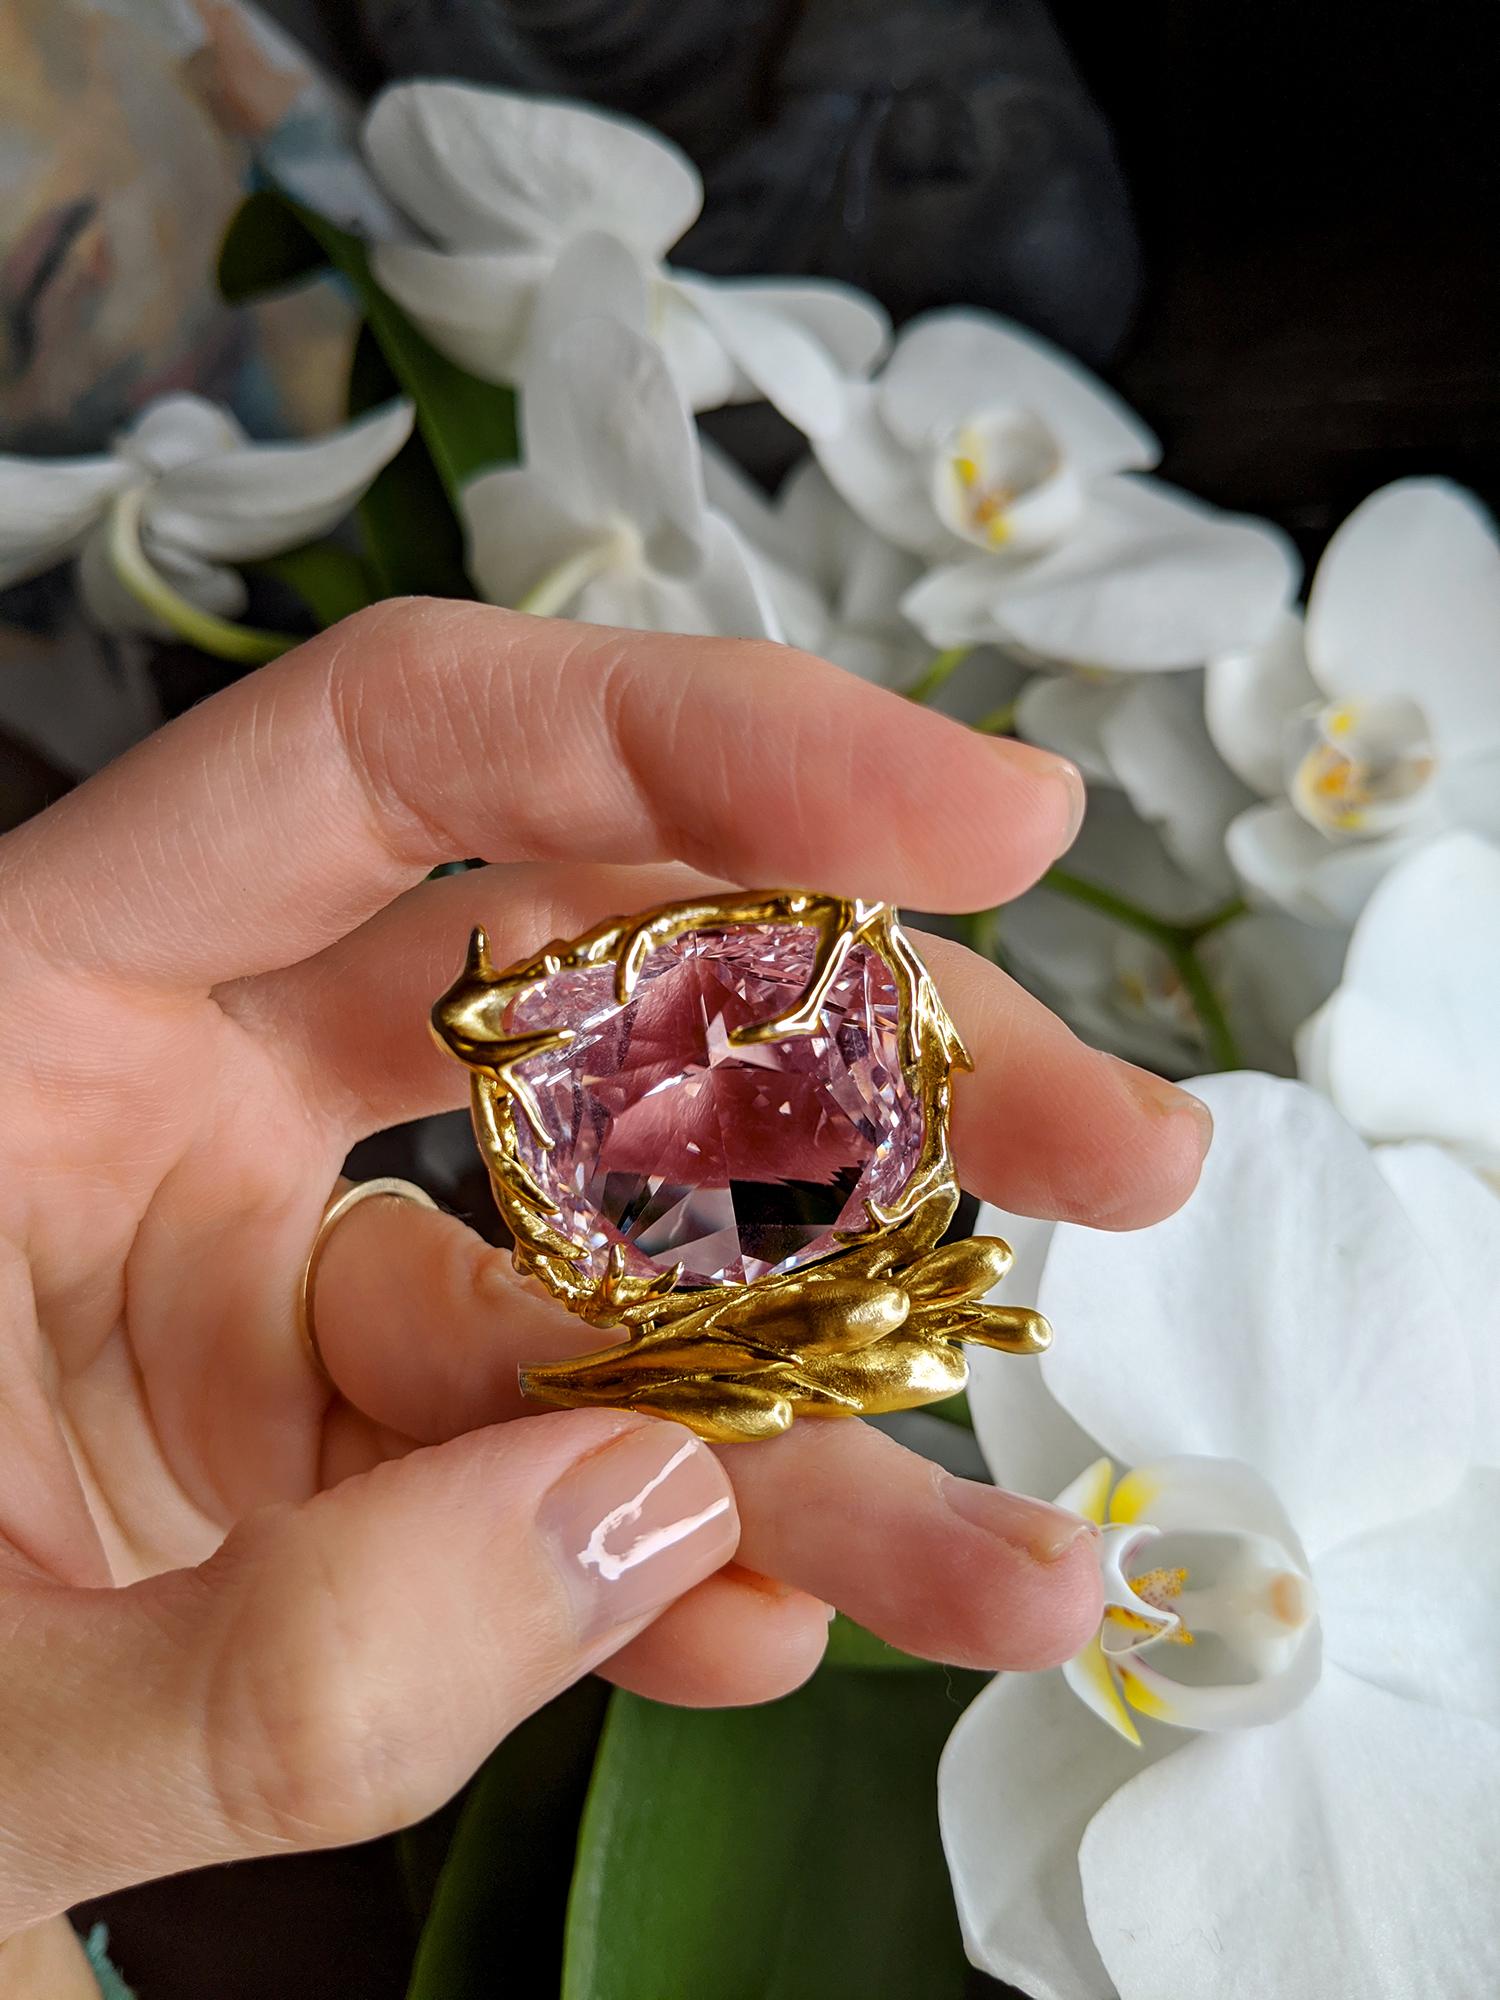 The Fairy Tale Engagement  ring, featured in Vogue UA, is made of 18 karat yellow gold and features diamonds and a large pink kunzite. This jewelry is designed by the artist and oil painter, Polya Medvedeva, who has been creating outstanding jewelry